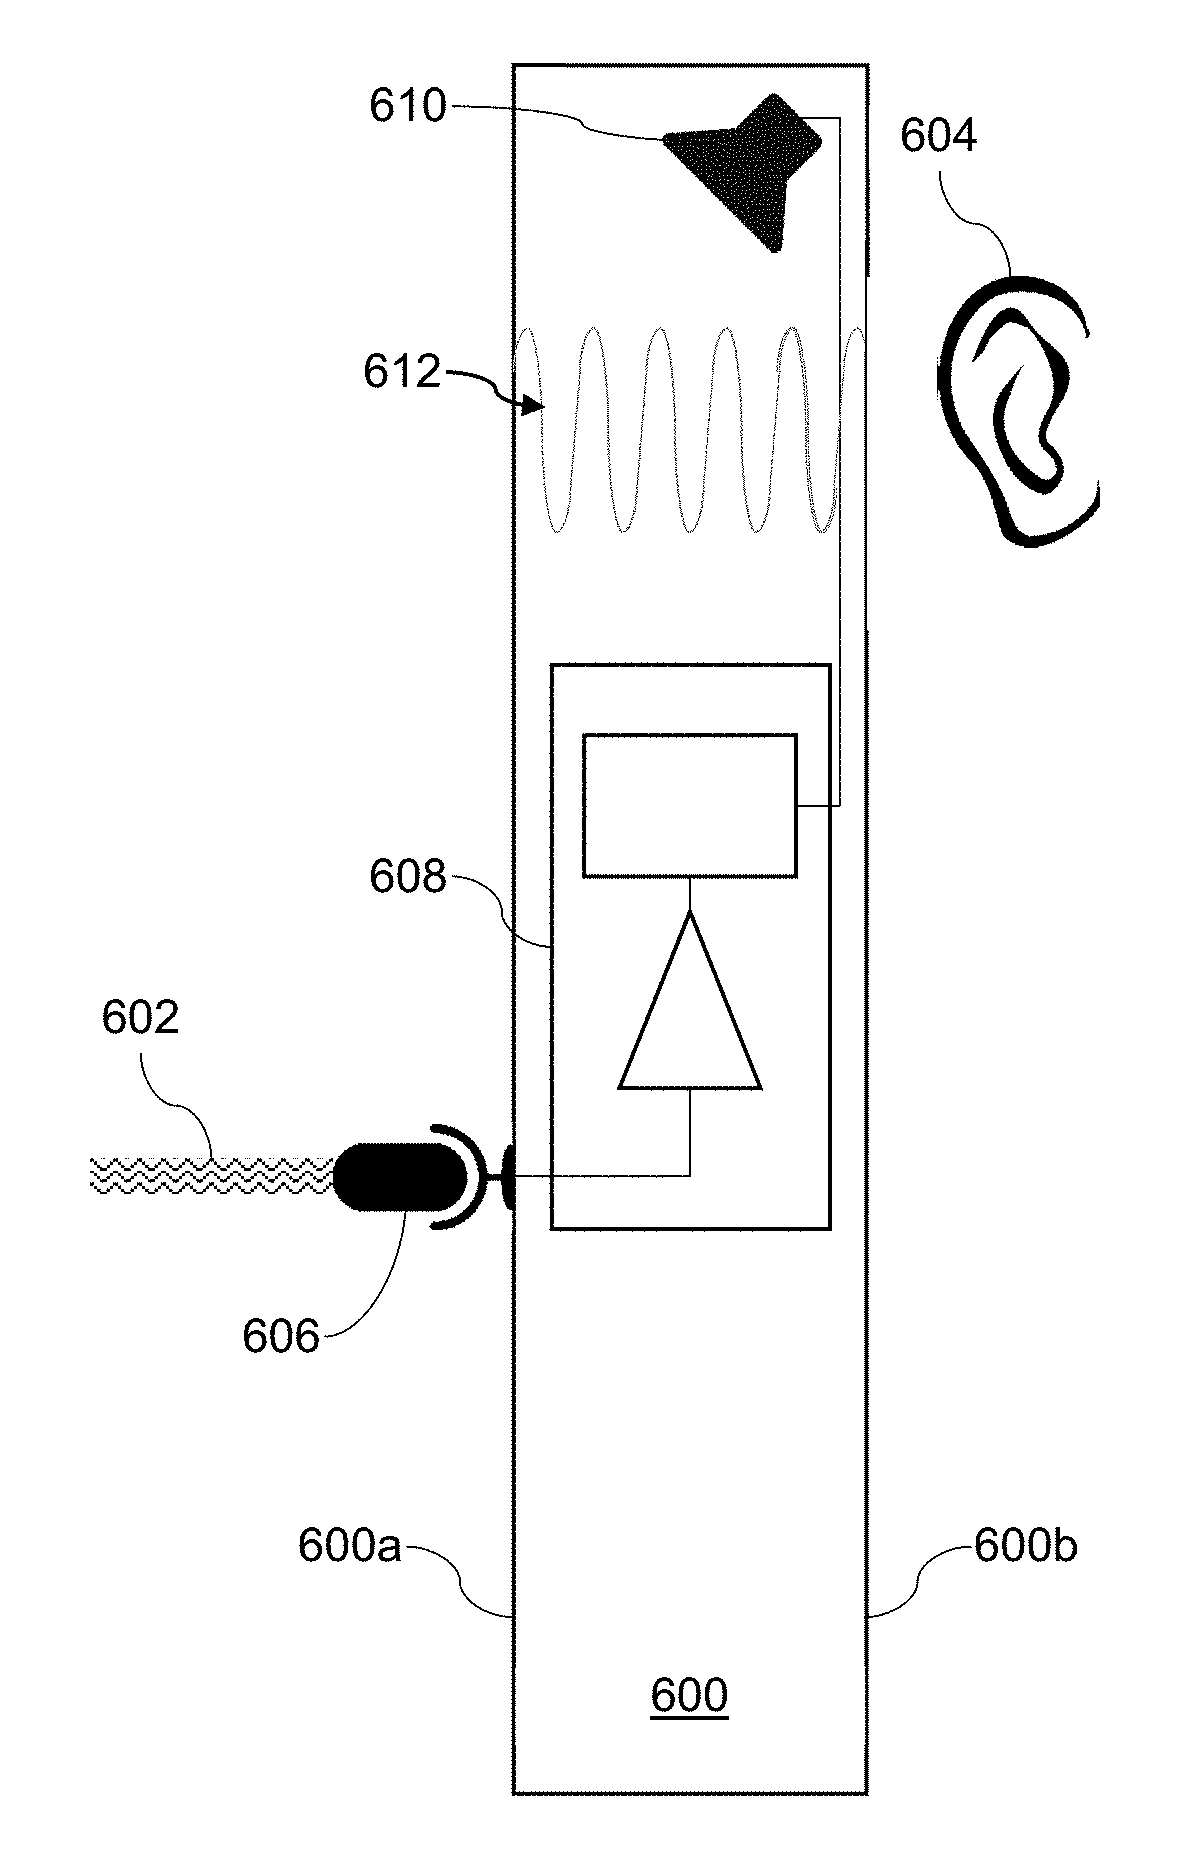 Acoustic wall assembly having active noise-disruptive properties, and/or method of making and/or using the same